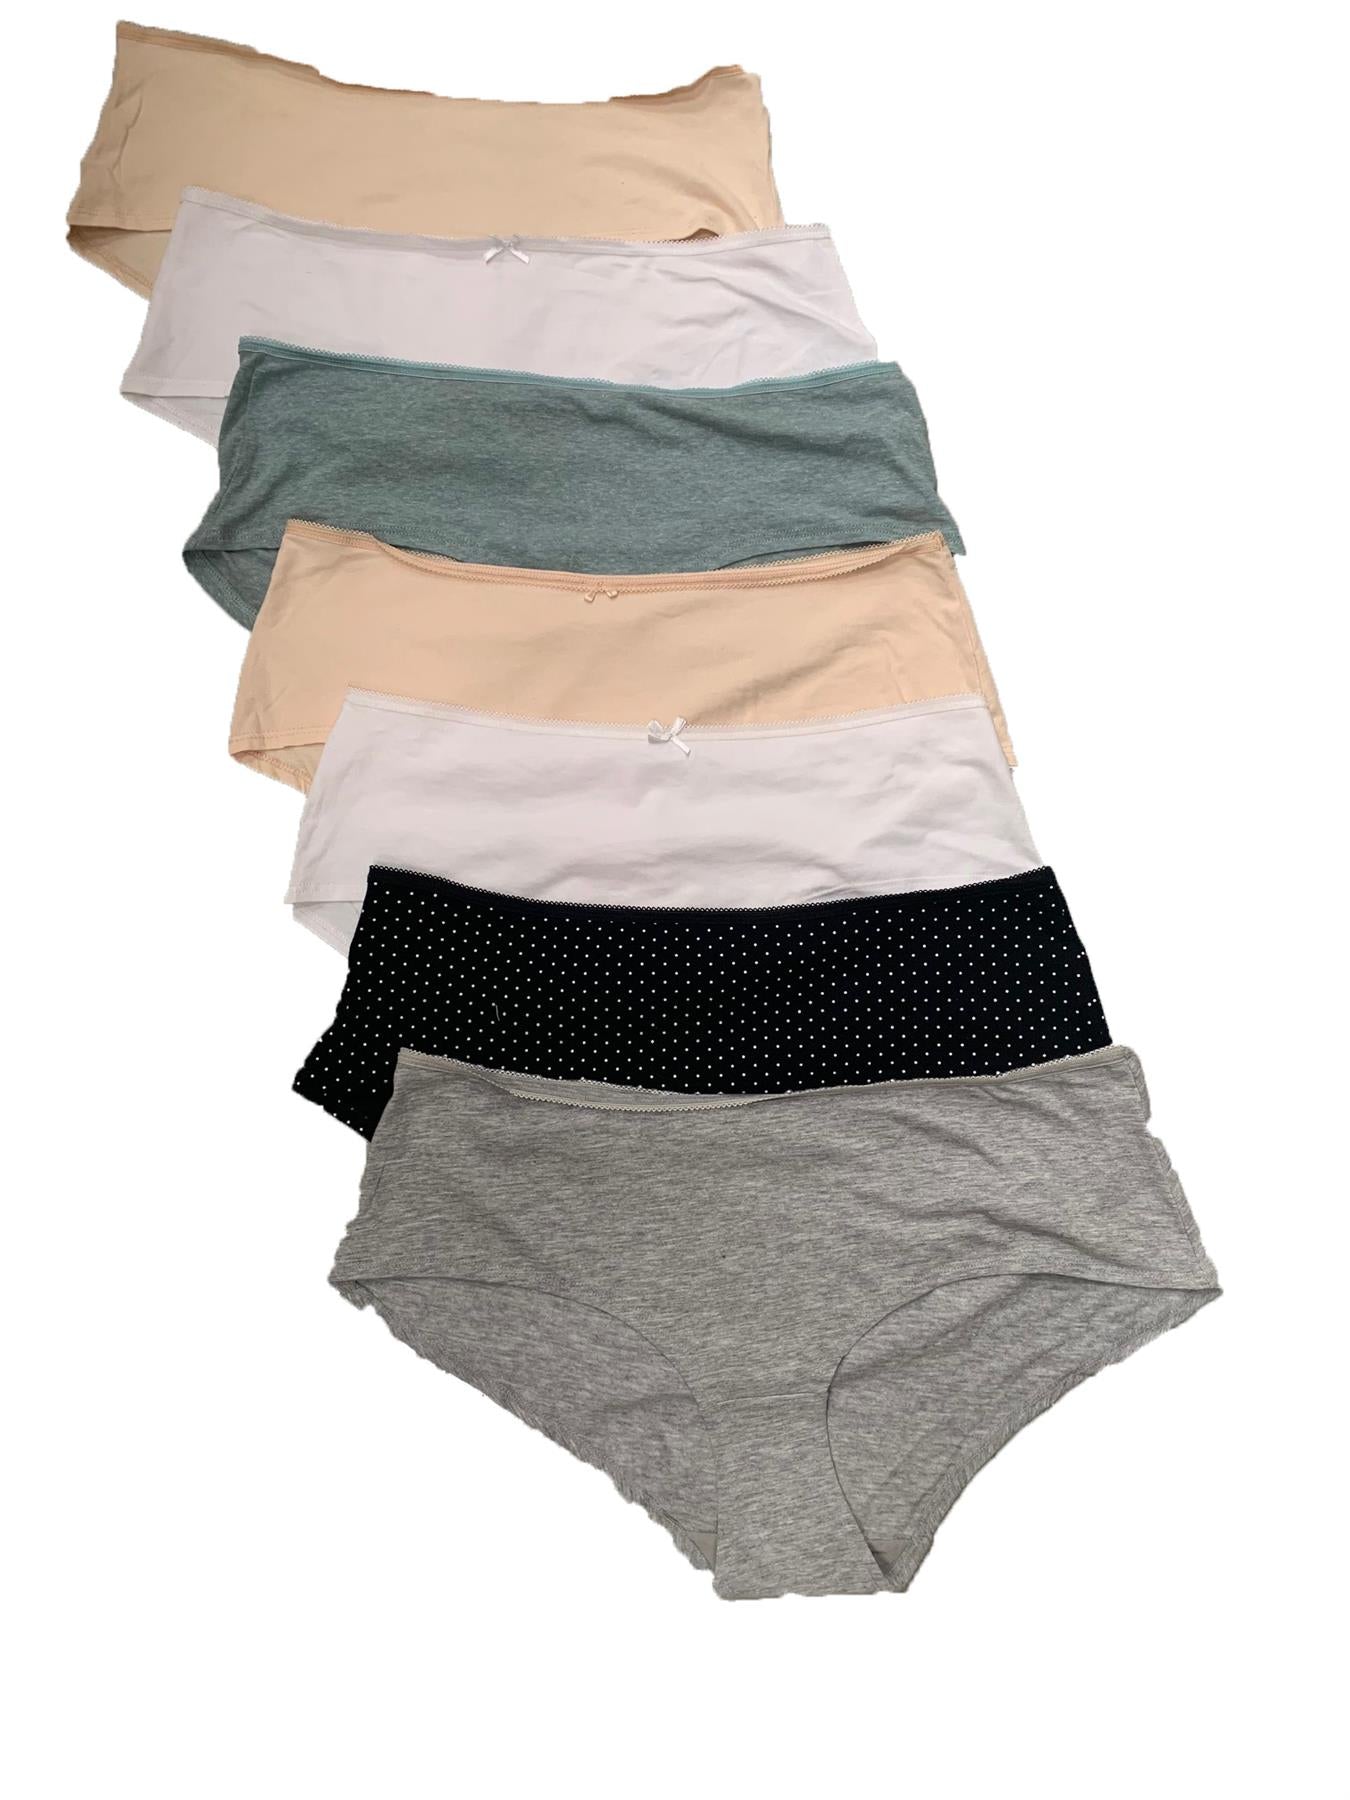 Next Store Cotton or-and Microfibre Short Hipster Brief Knickers 7 Pack